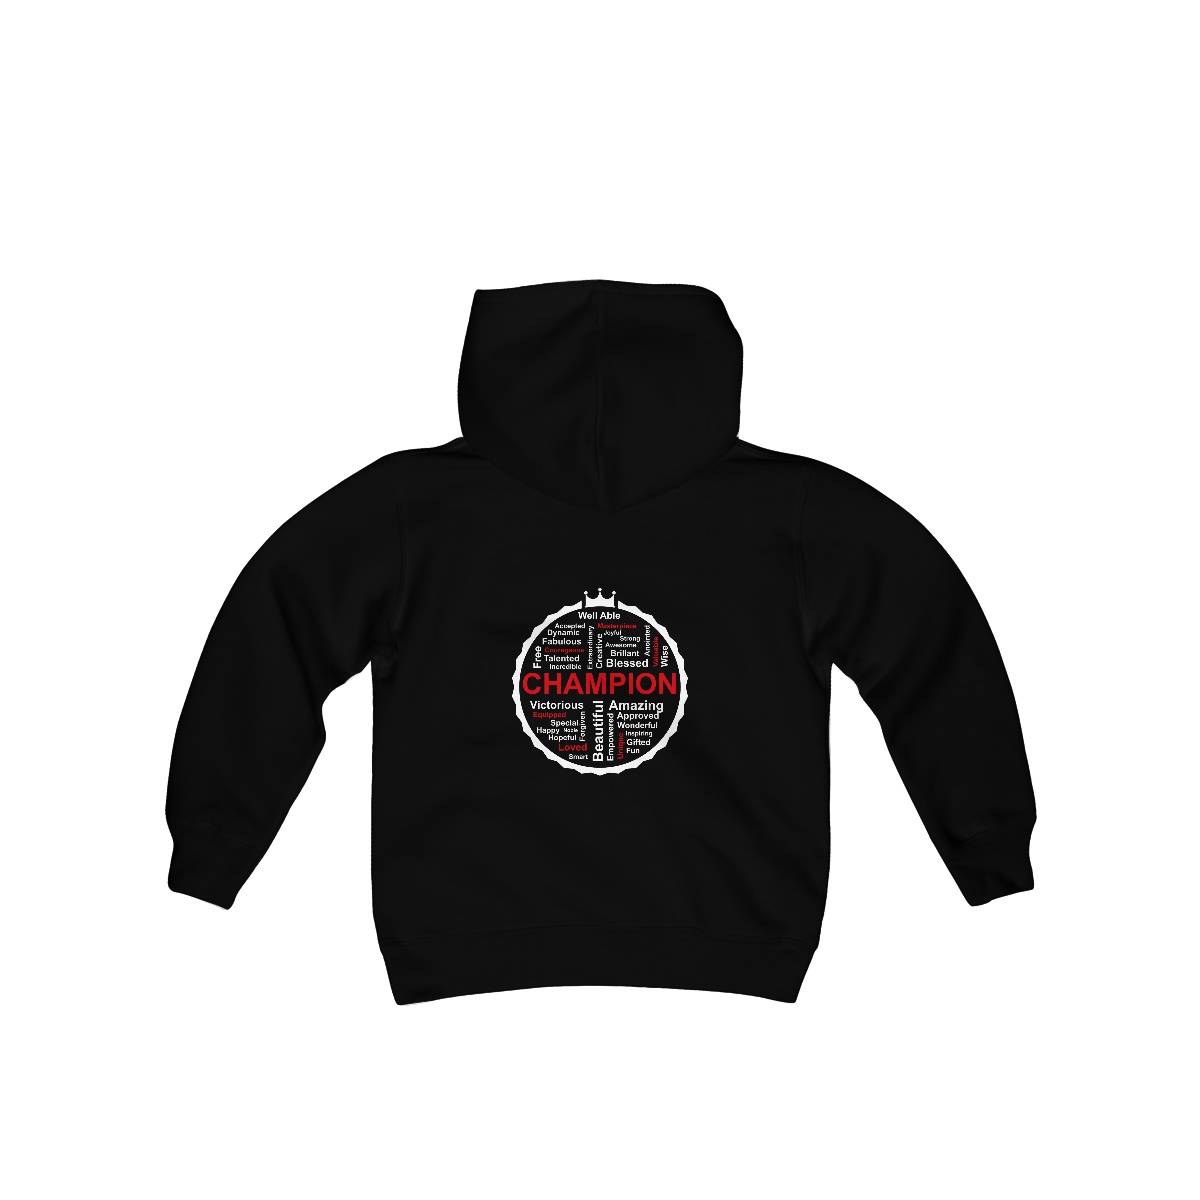 CHAMPION Kids Hoodie Special Club Champions Needs Ministry 